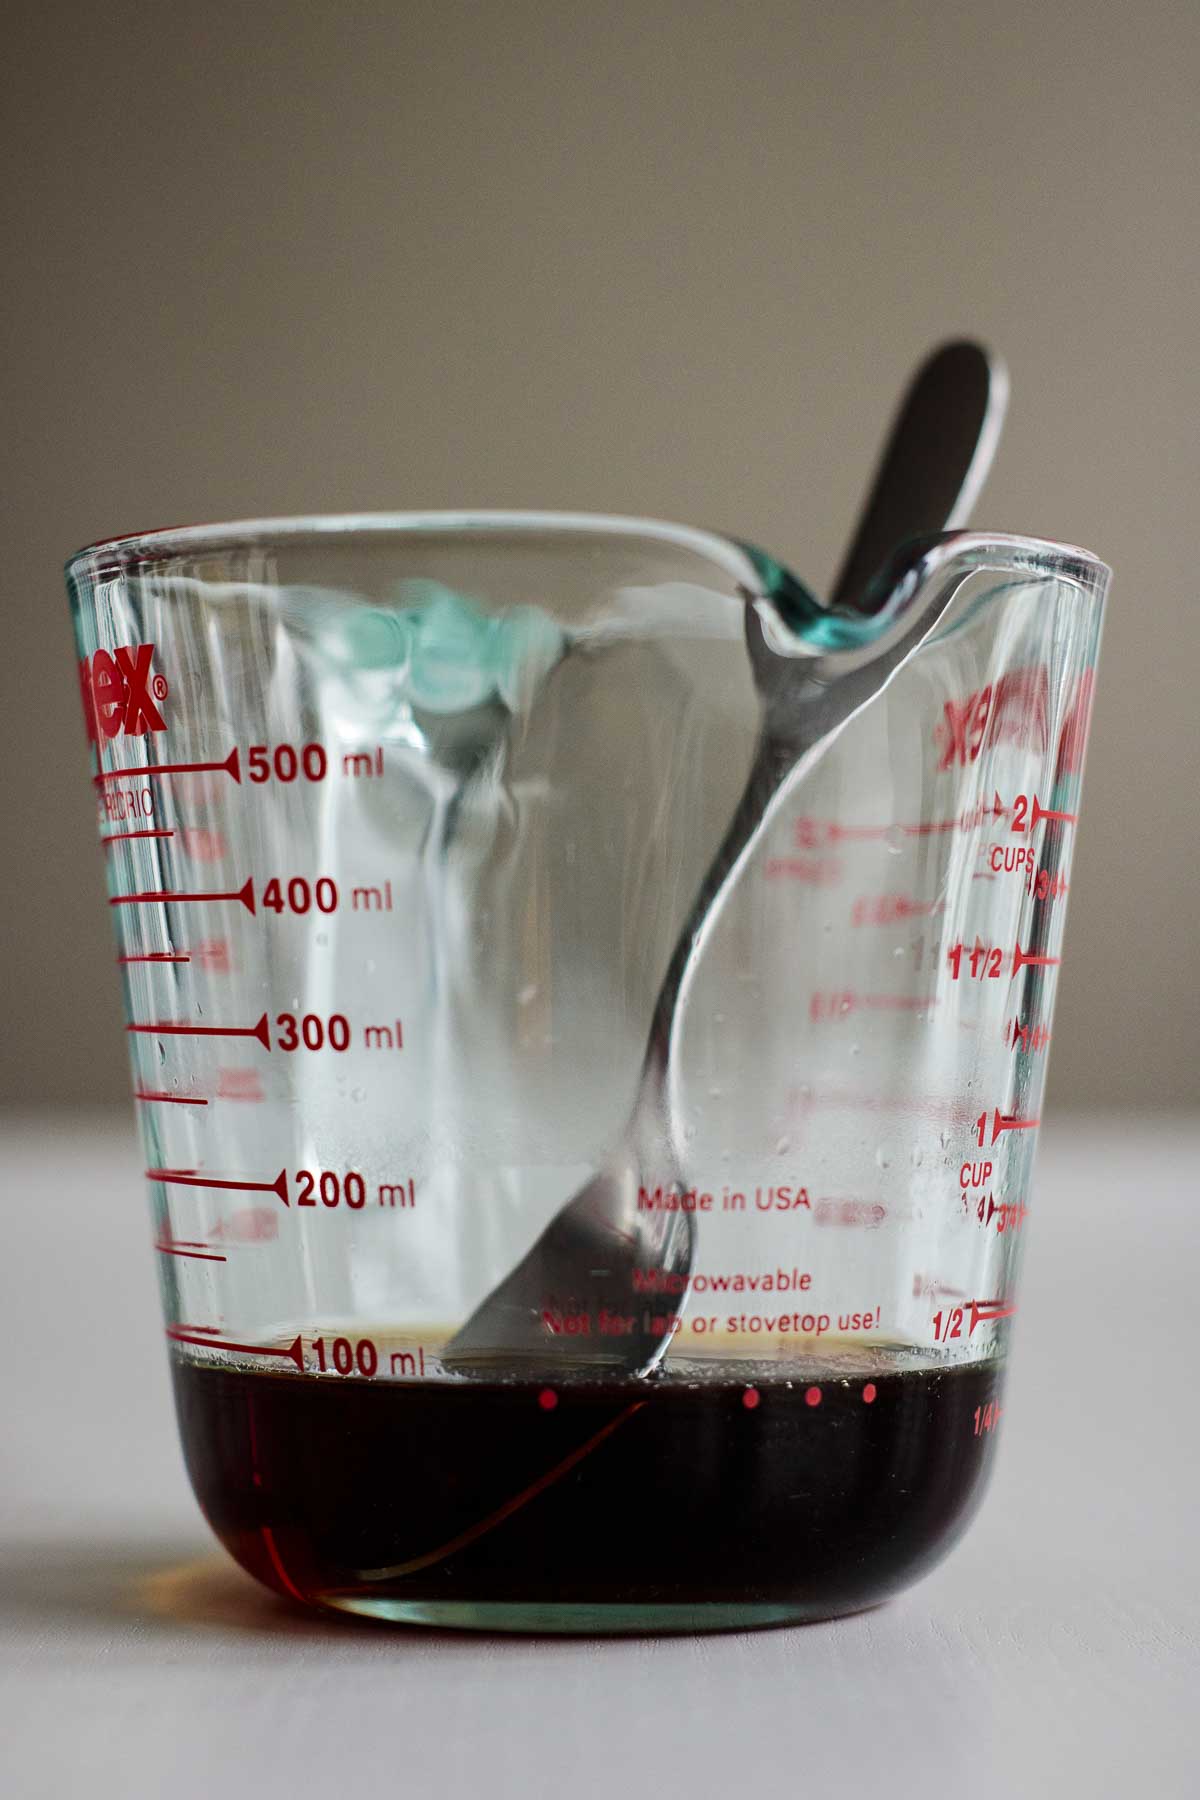 Brown sugar syrup inside the measuring cup.